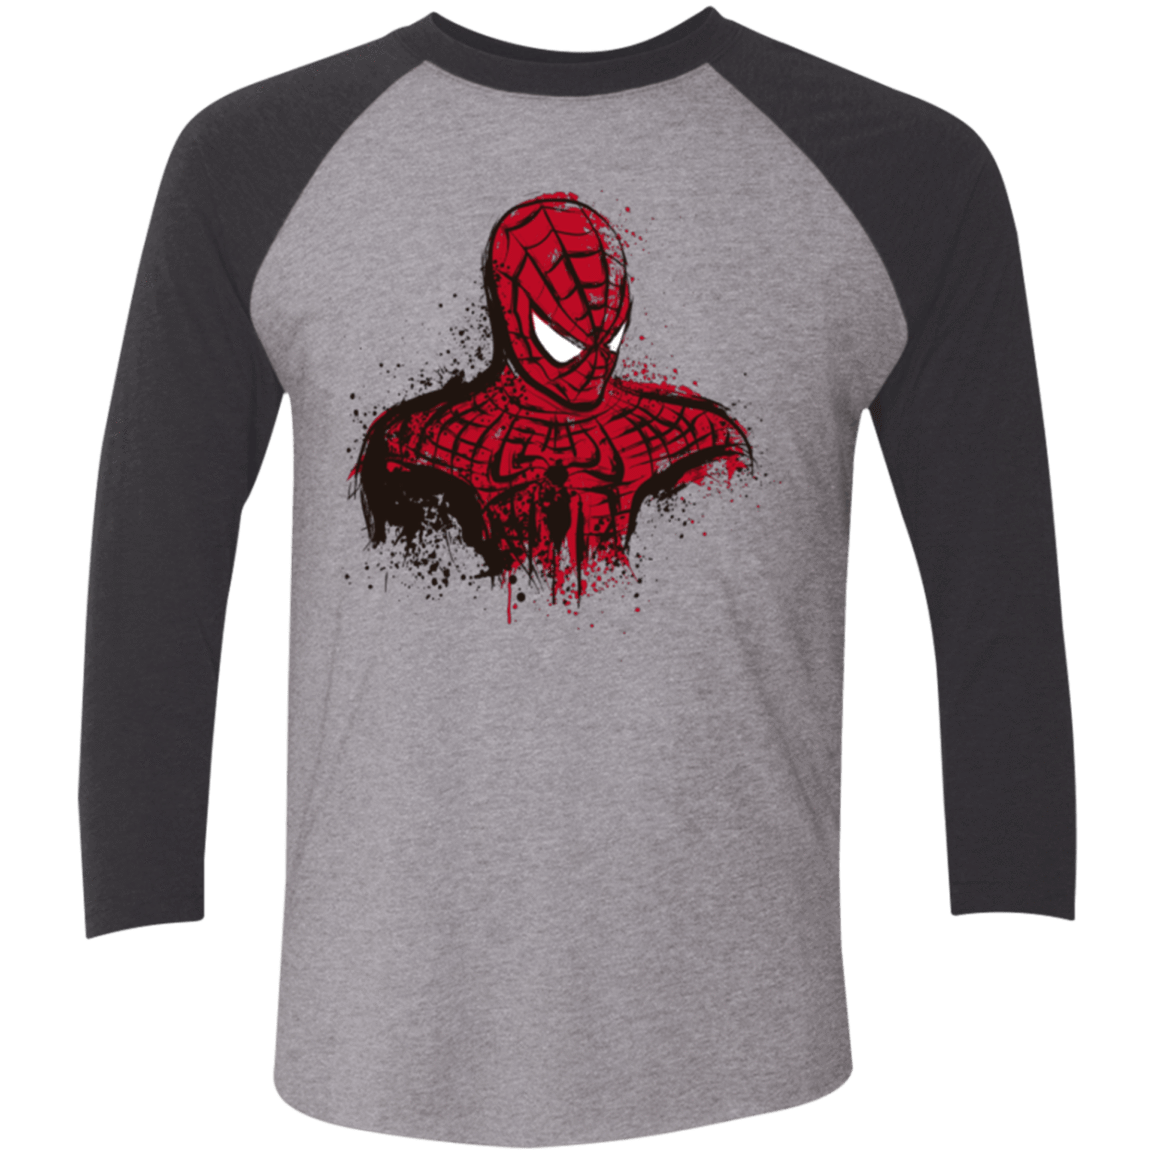 T-Shirts Premium Heather/ Vintage Black / X-Small Behind The Mask Men's Triblend 3/4 Sleeve